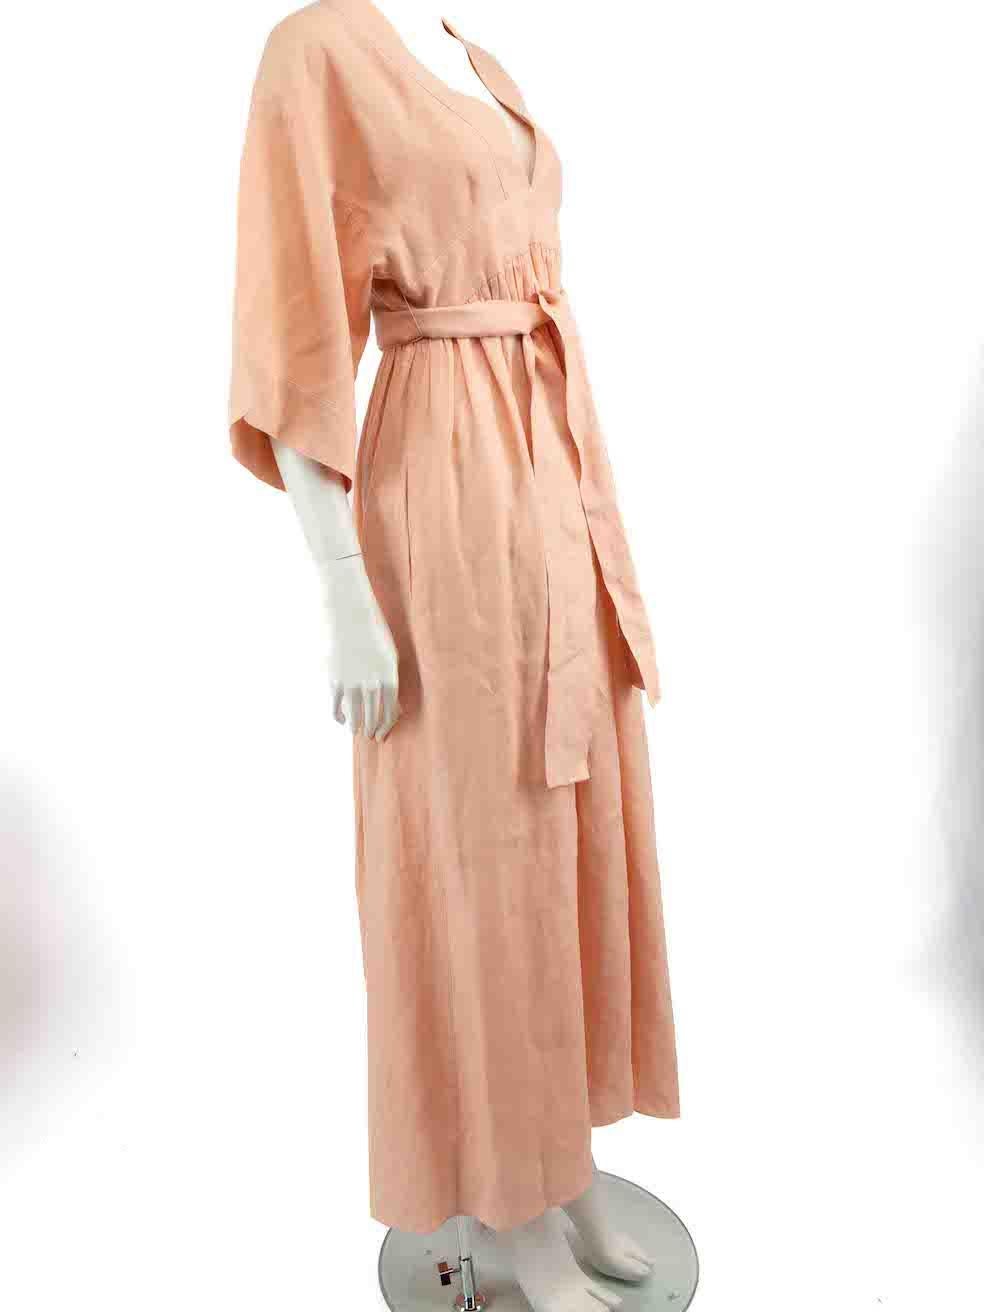 CONDITION is Very good. Hardly any visible wear to dress is evident on this used Three Graces London designer resale item.
 
 Details
 Pink
 Linen
 Maxi dress
 V neckline
 Gathered accent on waist
 Tie strap belted
 2x Front side pockets
 Back zip